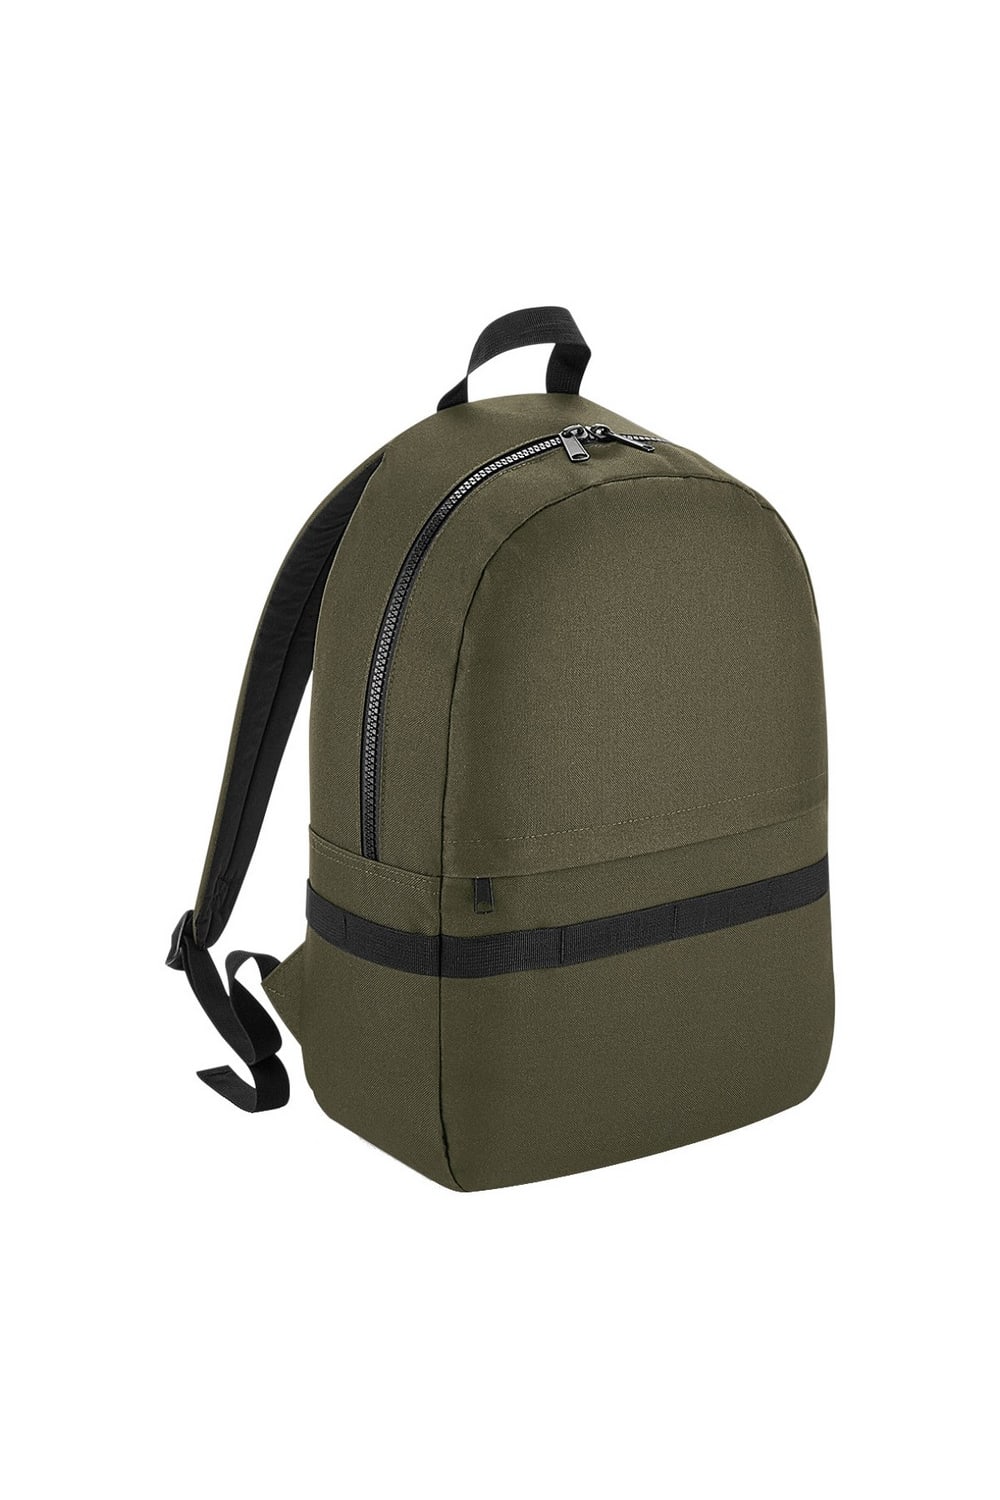 Adults Unisex Modulr 5.2 Gallon Backpack - Military Green